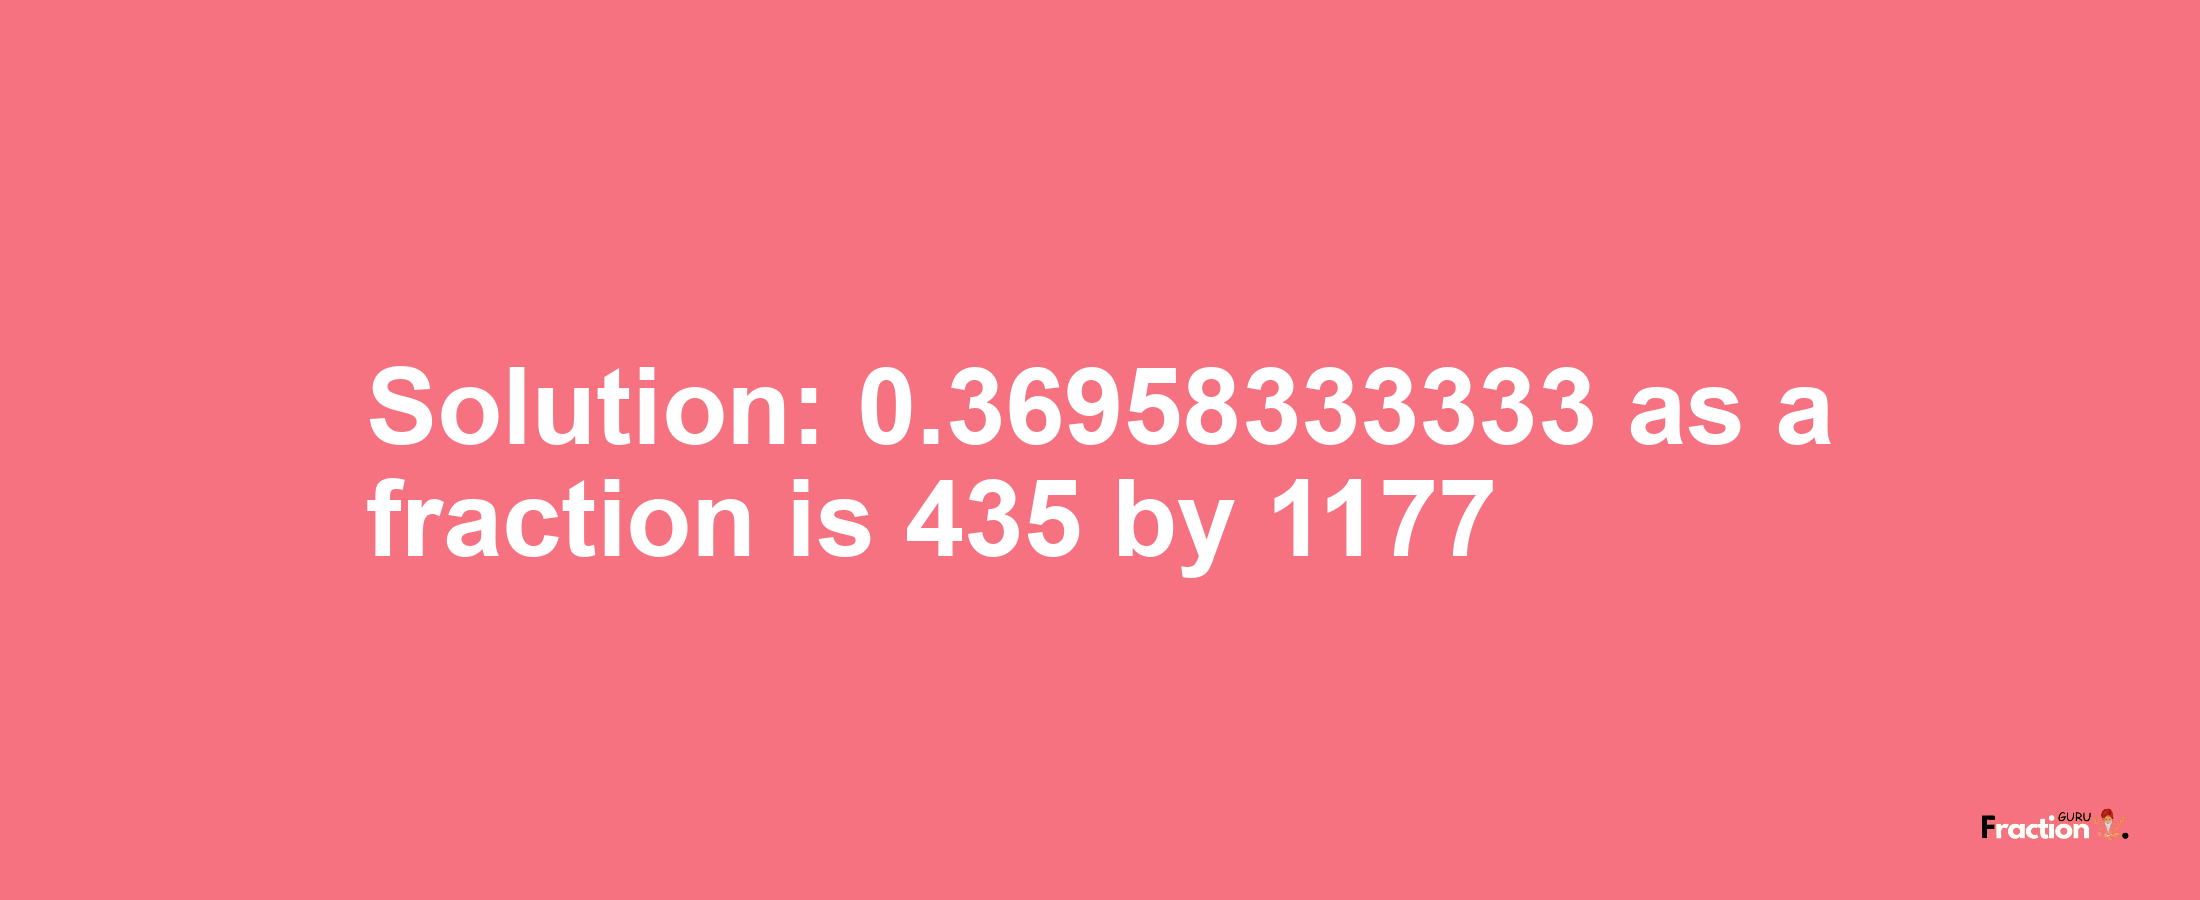 Solution:0.36958333333 as a fraction is 435/1177